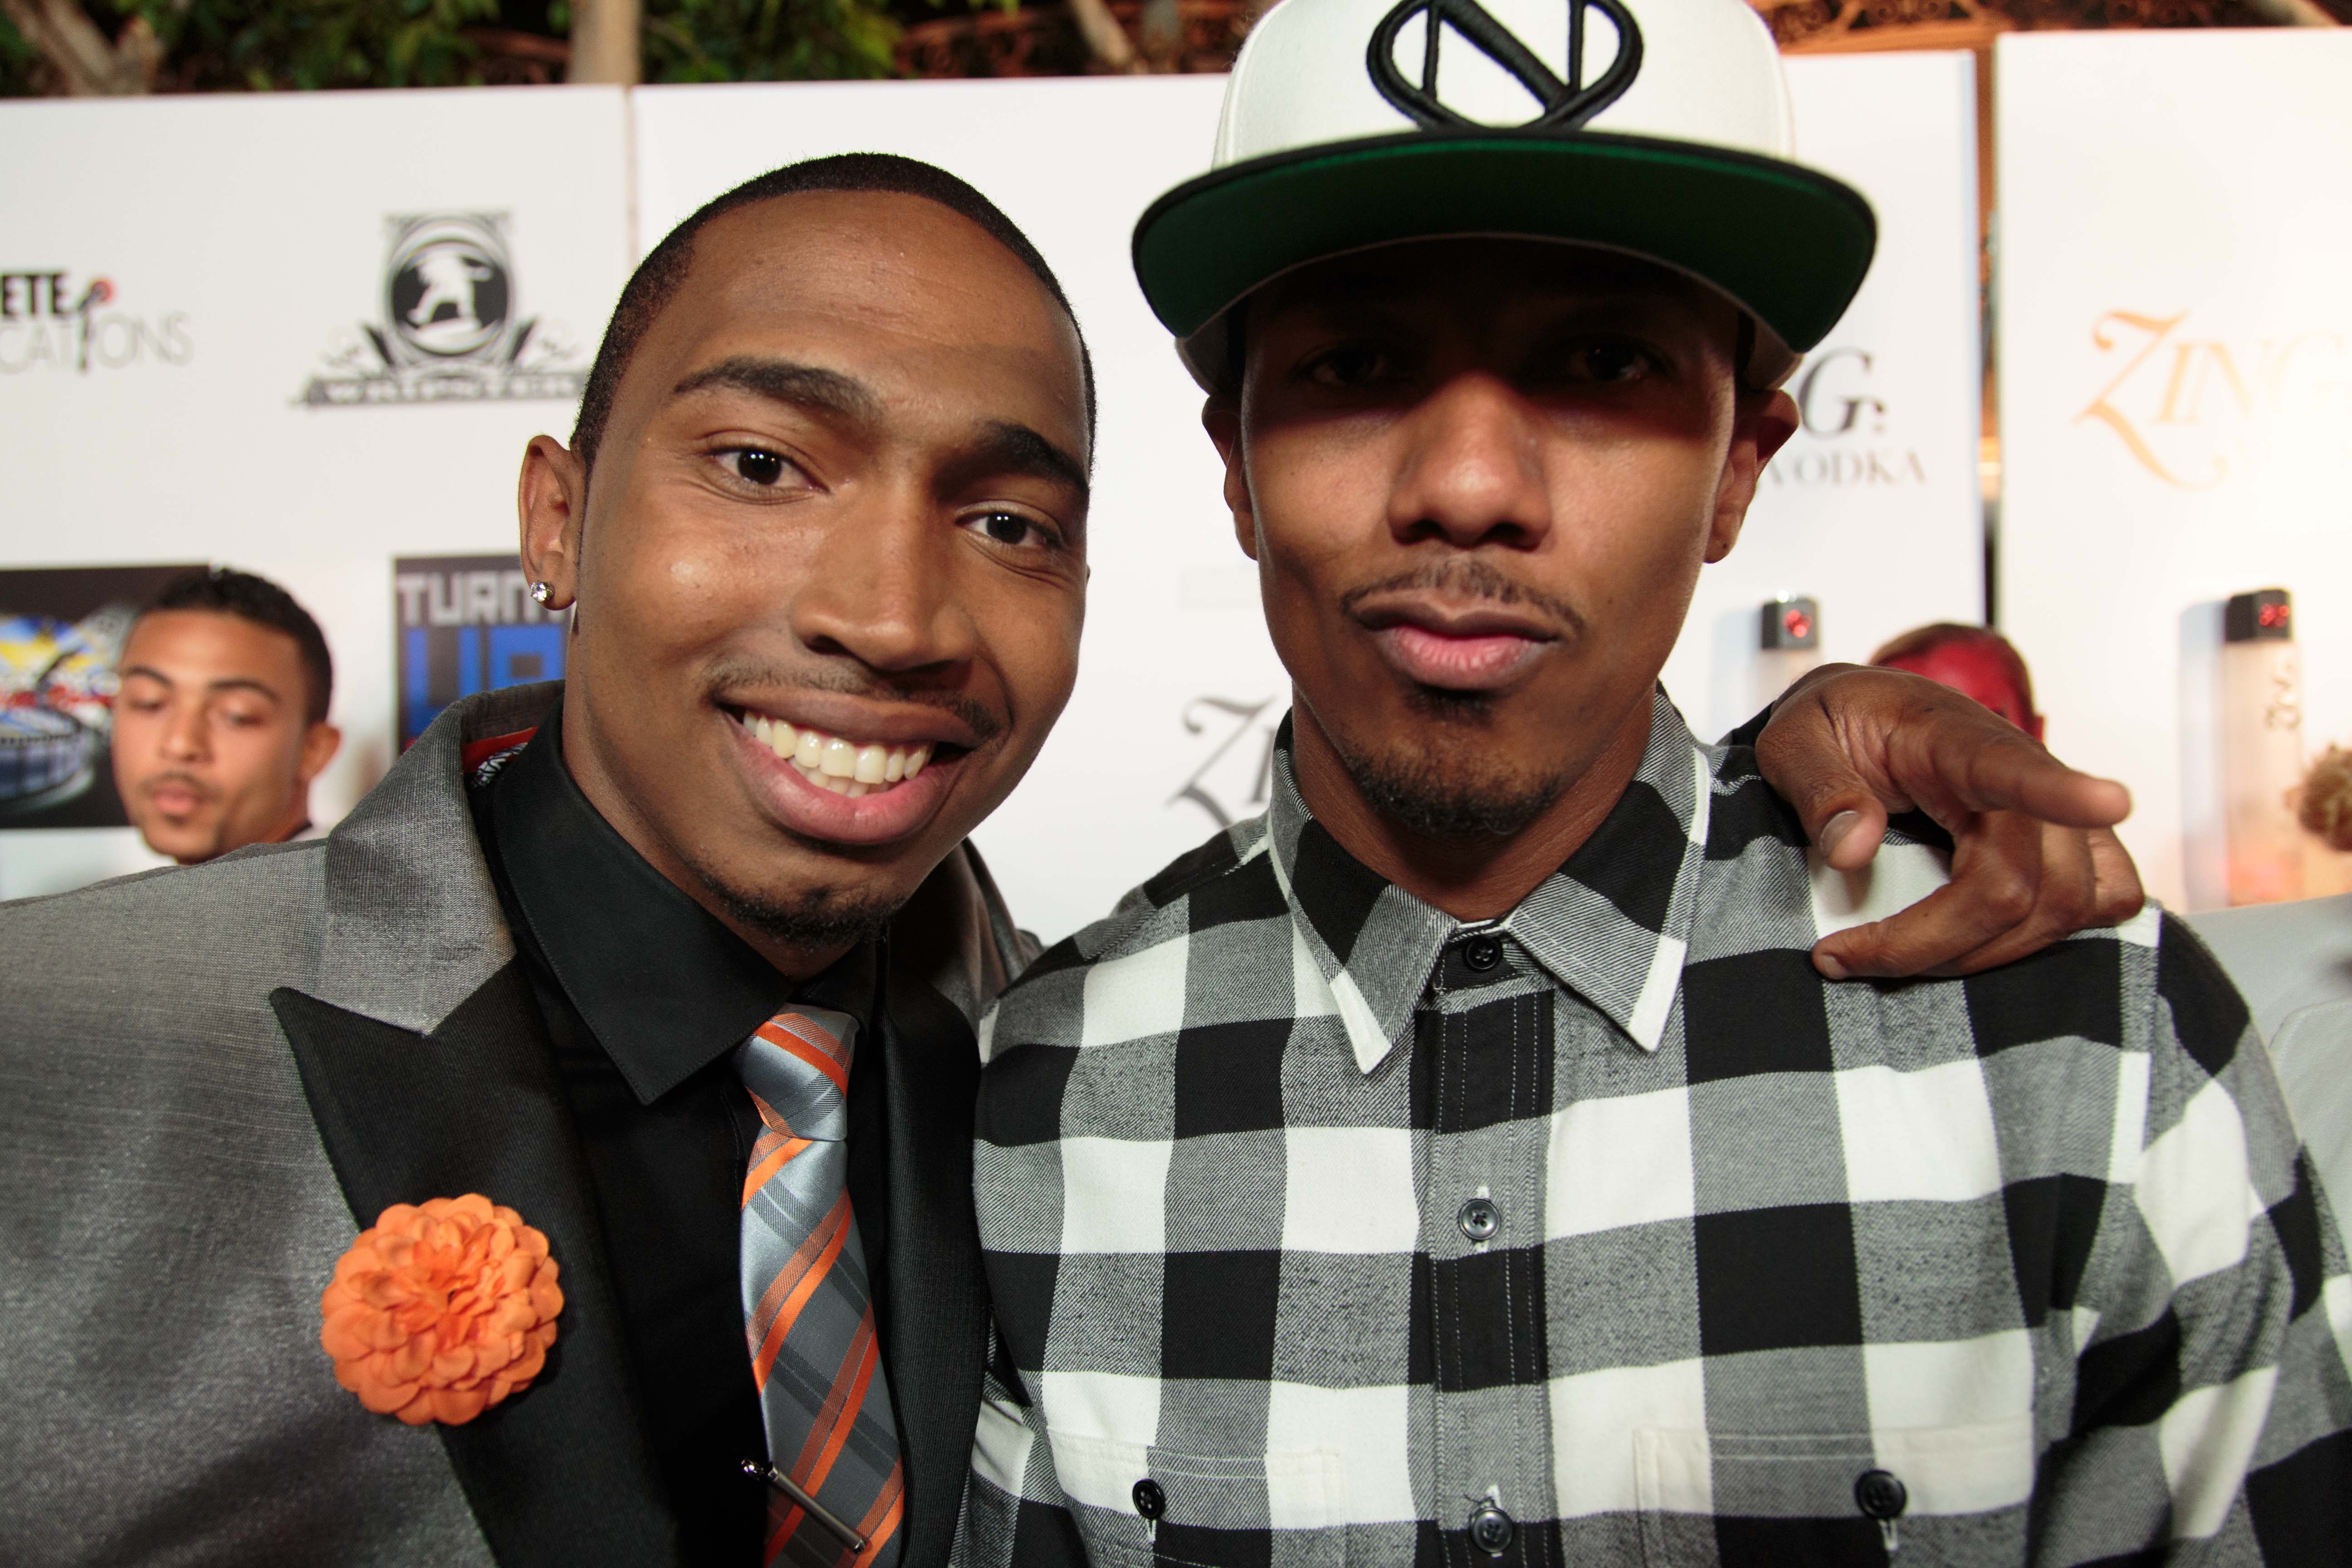 Noel Braham with actor/host Nick Cannon.